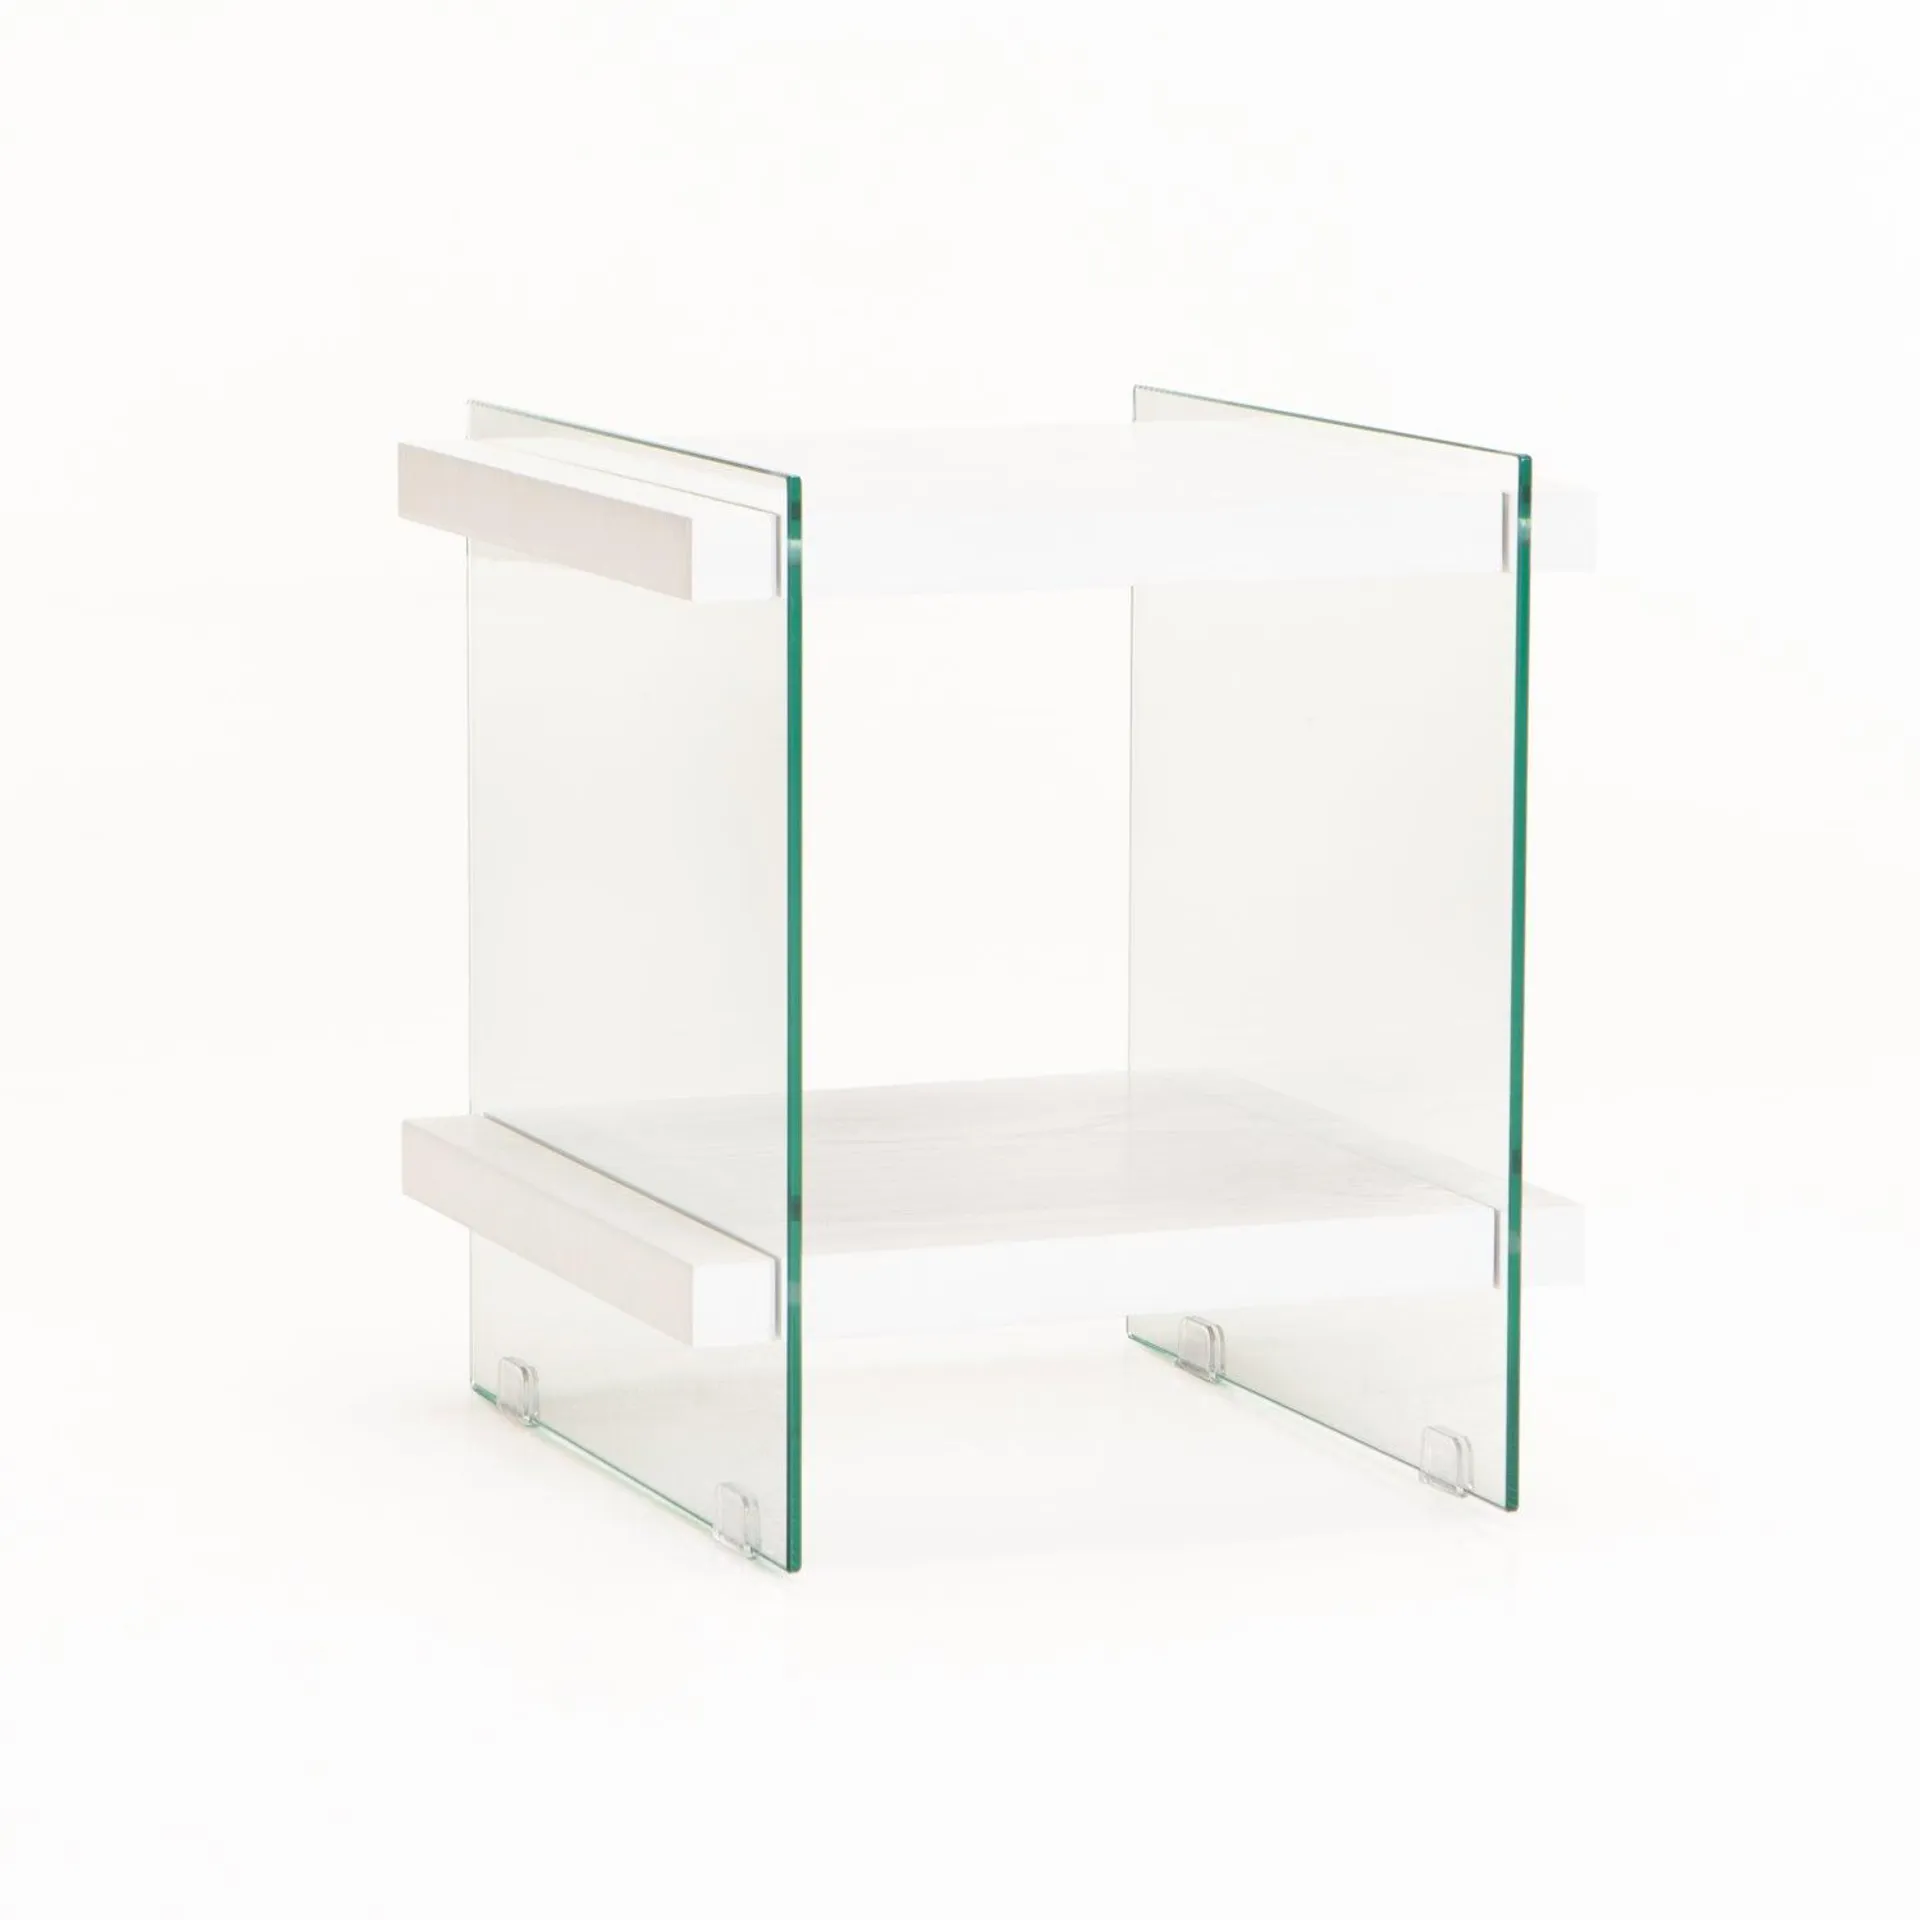 JULEP 45x45cm 8MM TEMPERED GLASS SIDE TABLE